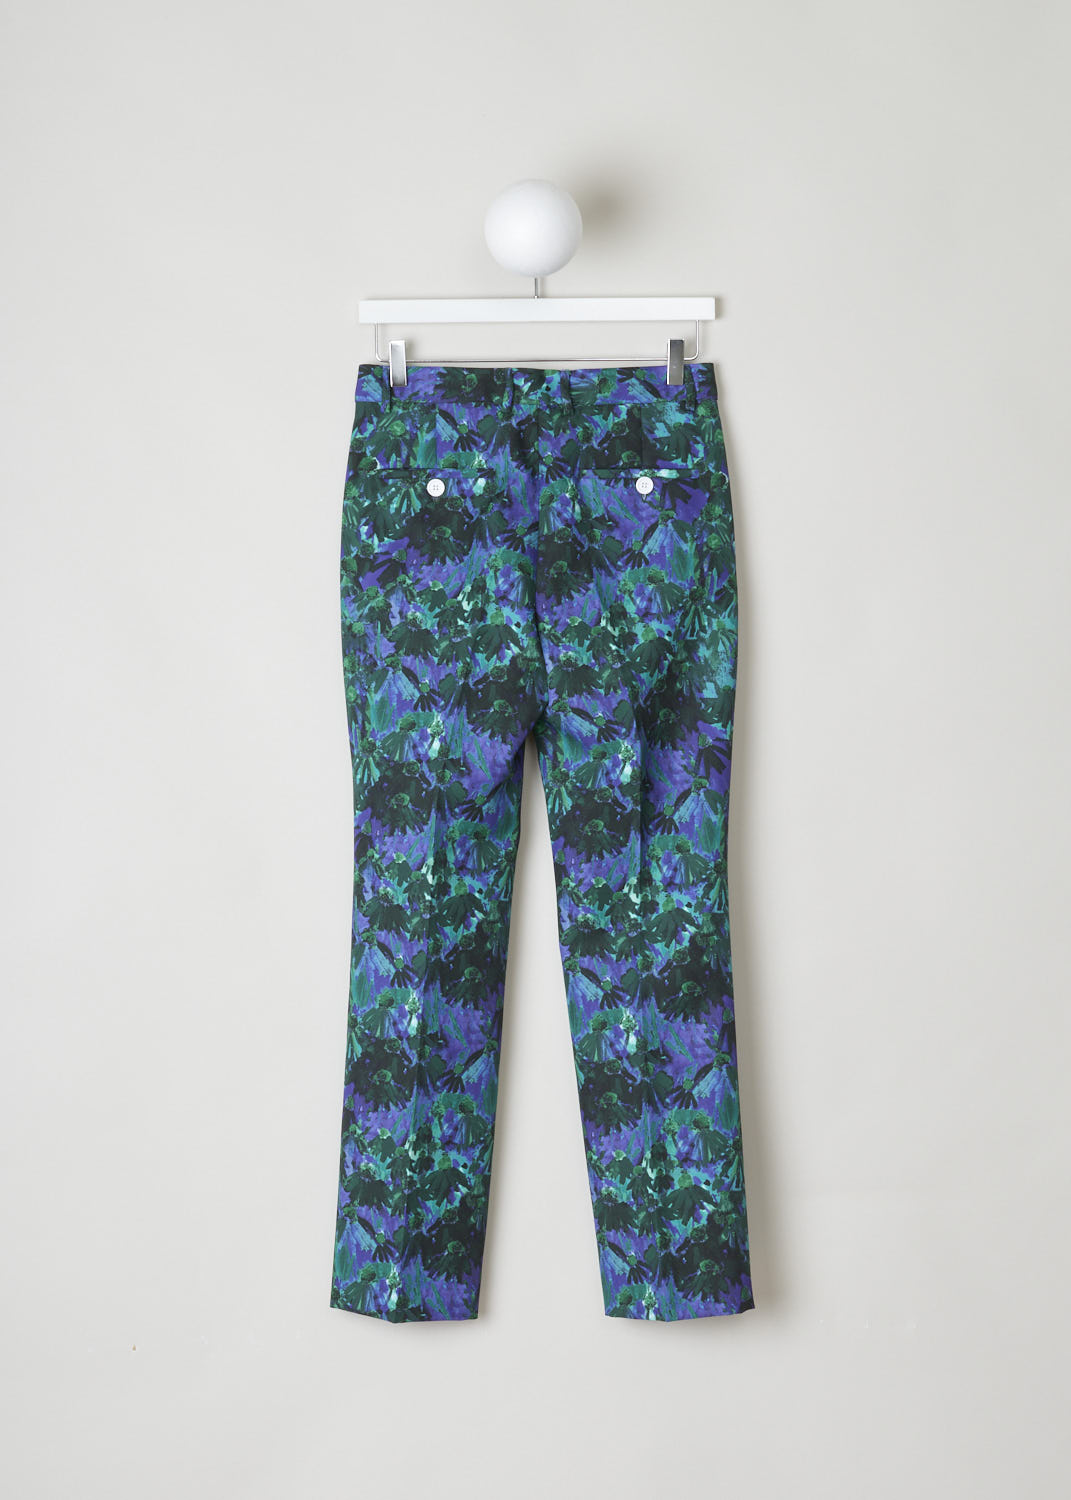 PLAN C,  MULTICOLORED FLORAL TROUSERS, PNCAA06B08_TP069_FIV02_GREEN_CLOVER, Print, Back, These multicolored floral trousers have belt loops, a contrasting white button and a concealed zip fastening as well as slanted pockets in the front and buttoned welt pockets in the back. On the pant legs, centre pleats can be found front and back.
